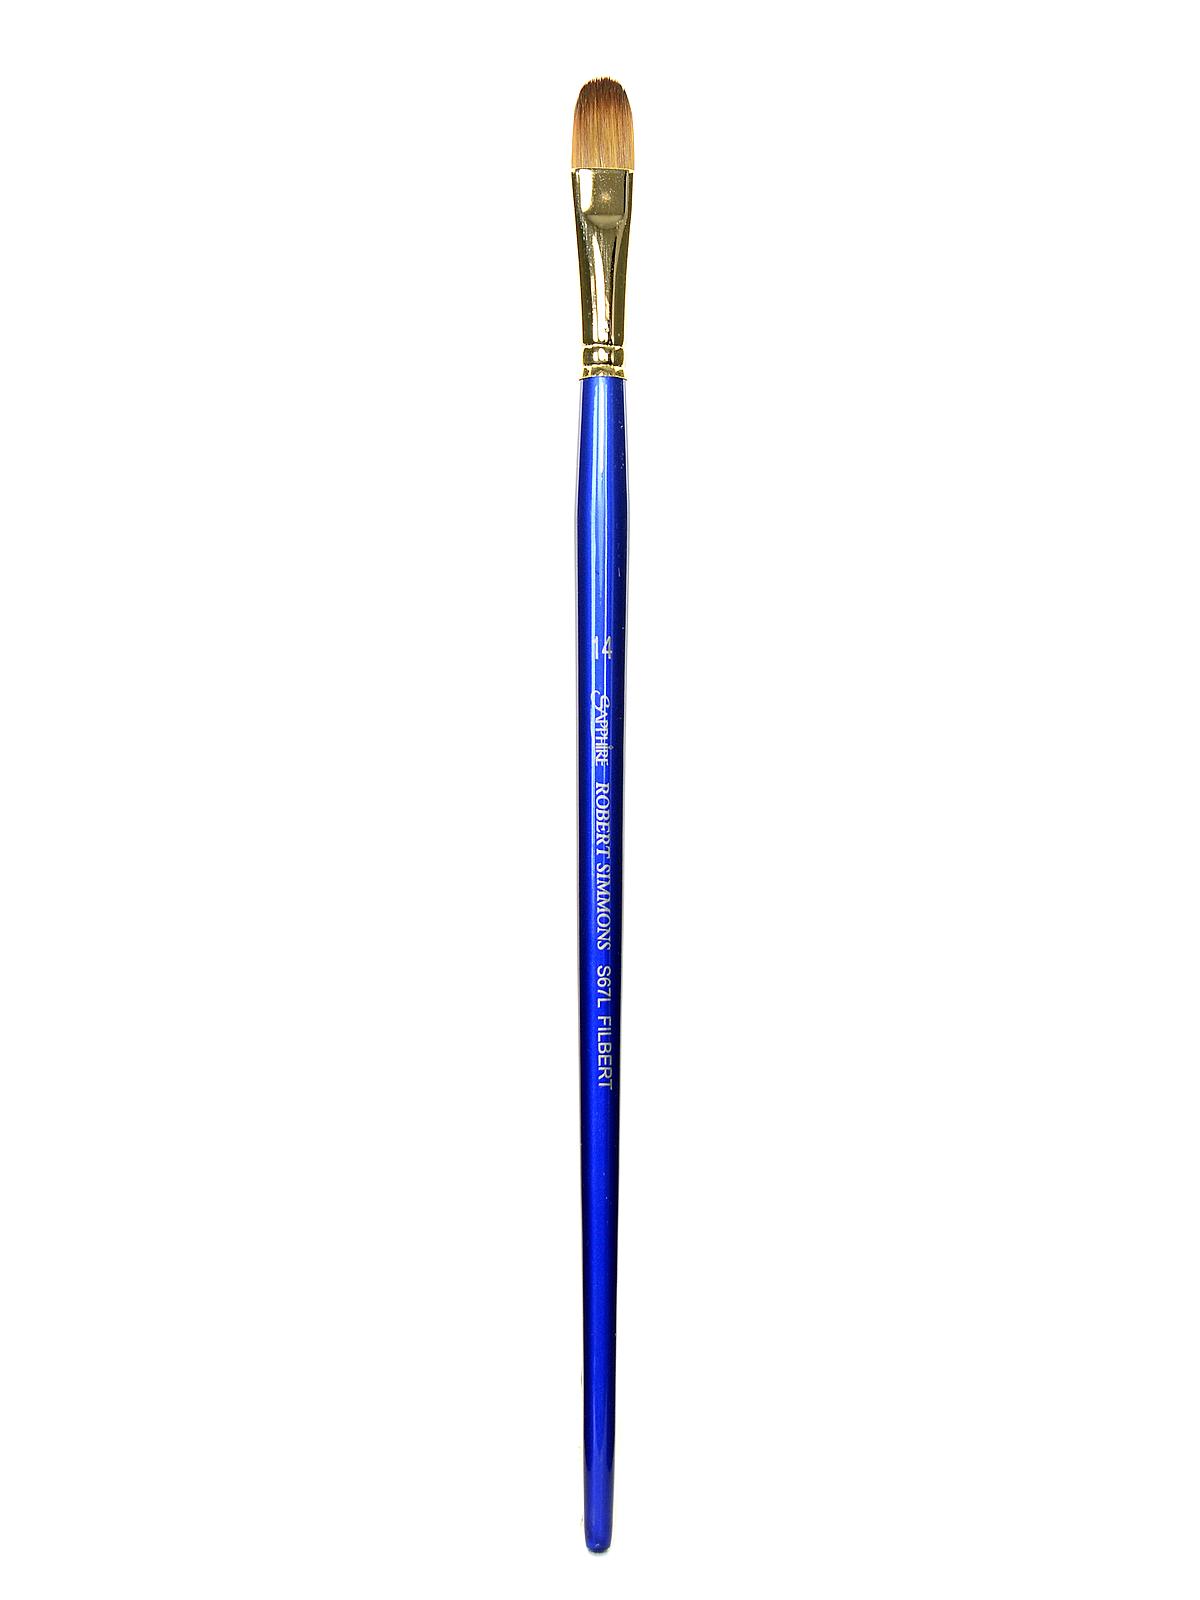 Sapphire Series Synthetic Brushes Long Handle 14 Filbert